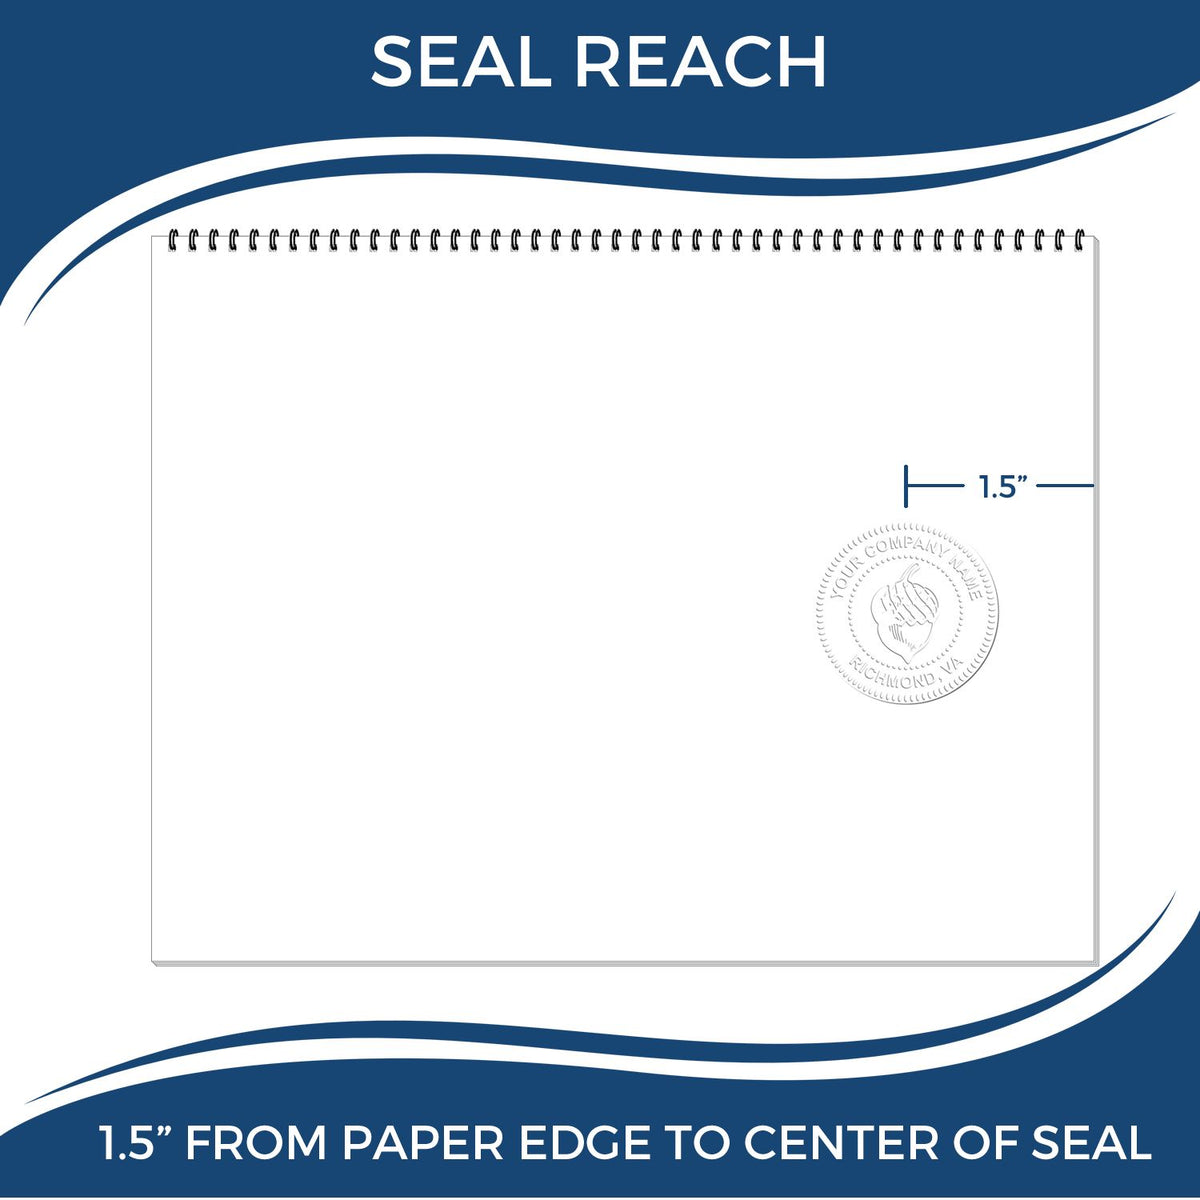 An infographic showing the seal reach which is represented by a ruler and a miniature seal image of the Soft Nevada Professional Geologist Seal